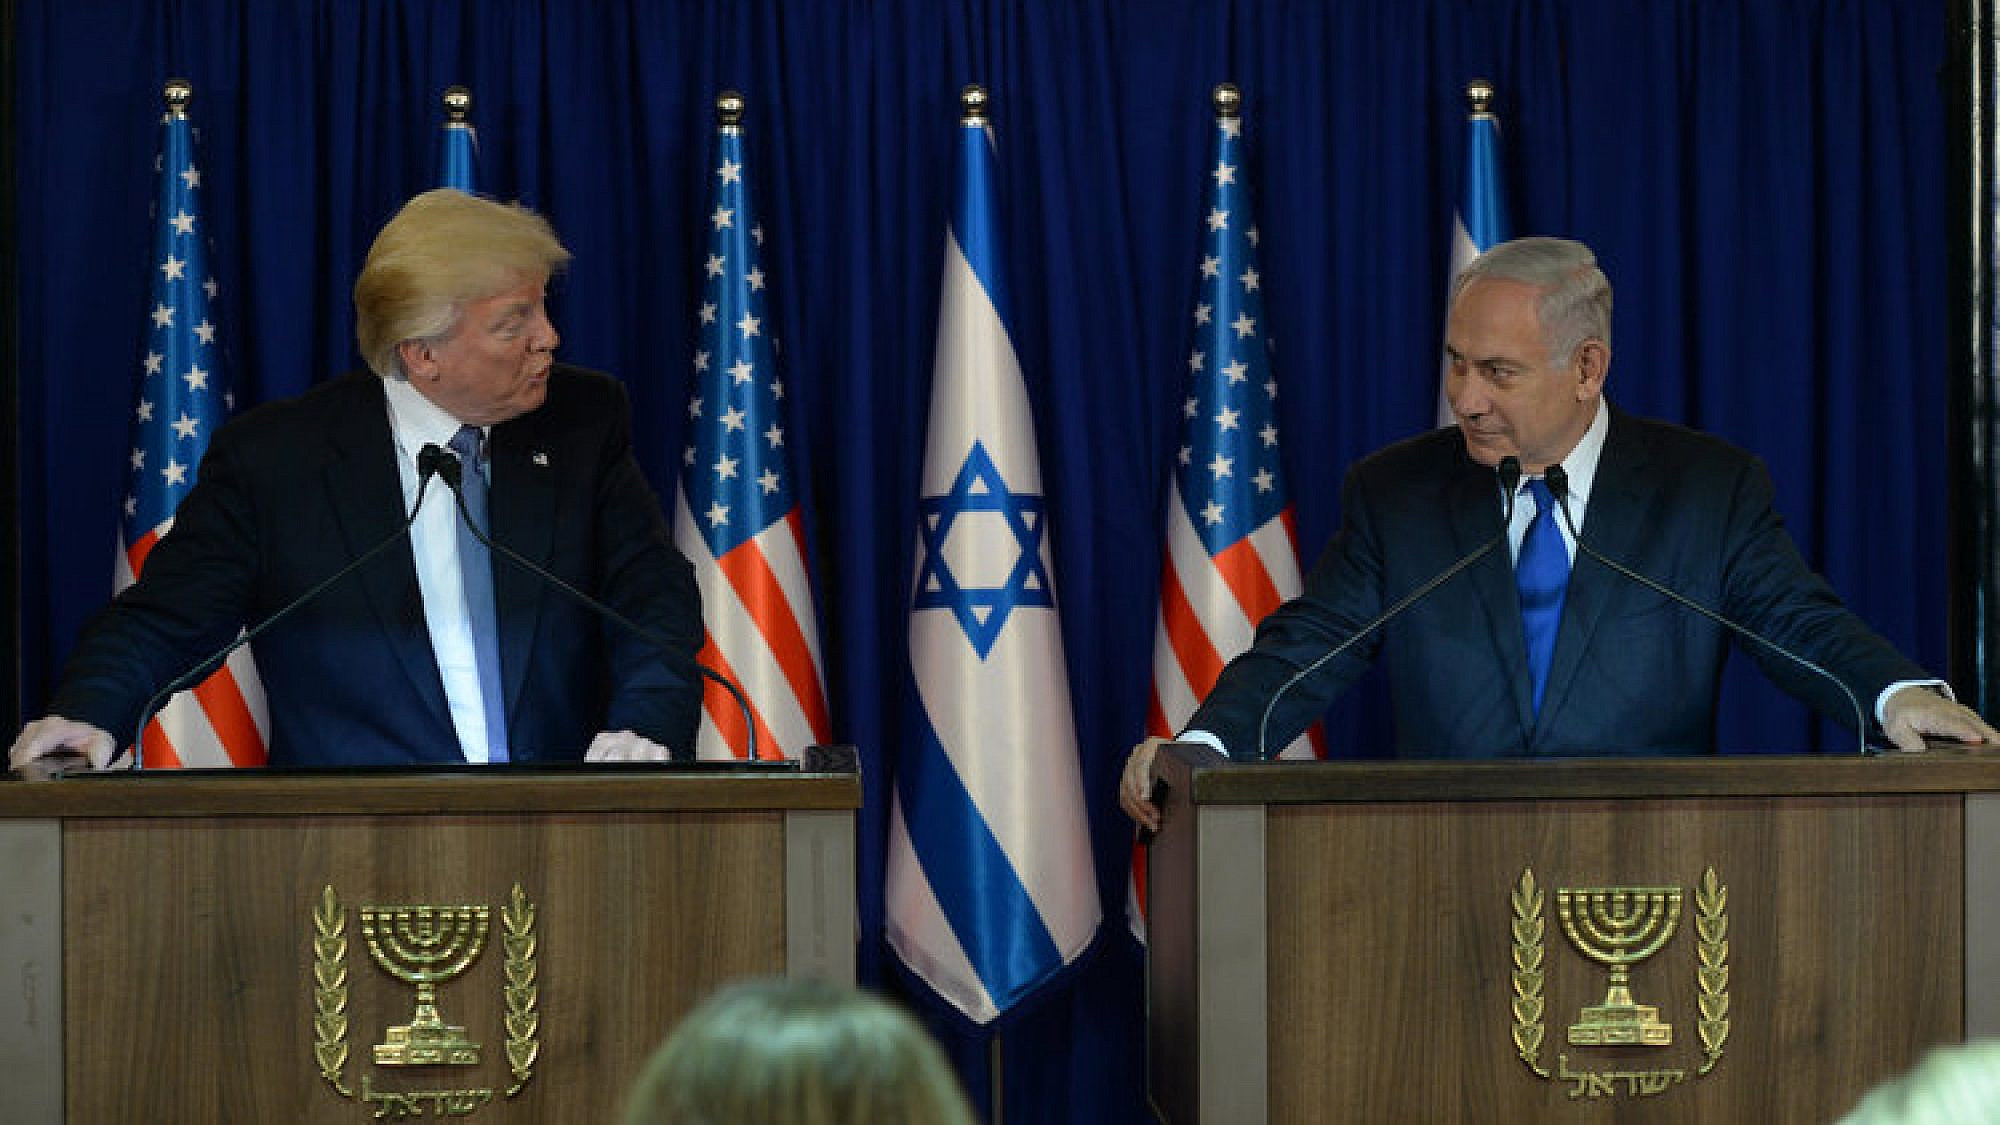 President Donald Trump and Prime Minister Benjamin Netanyahu make a joint appearance in Jerusalem on May 22, 2017. Credit: Haim Zach/GPO.